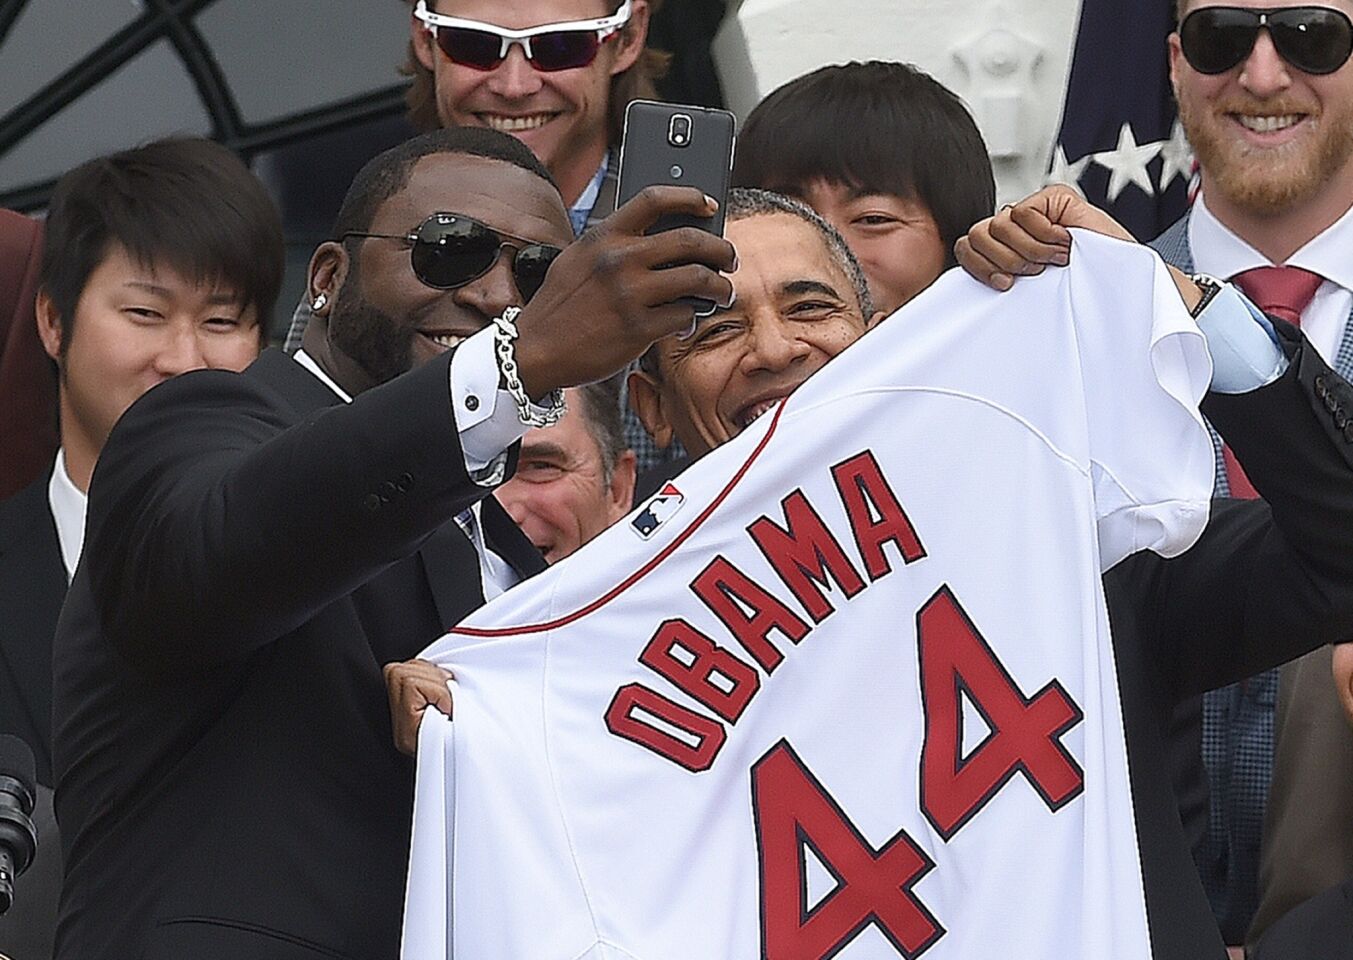 Red Sox Designated Hitter David Ortiz takes a selfie with President Obama after presenting a jersey during a ceremony on the South Lawn at the White House on April 1, 2014.